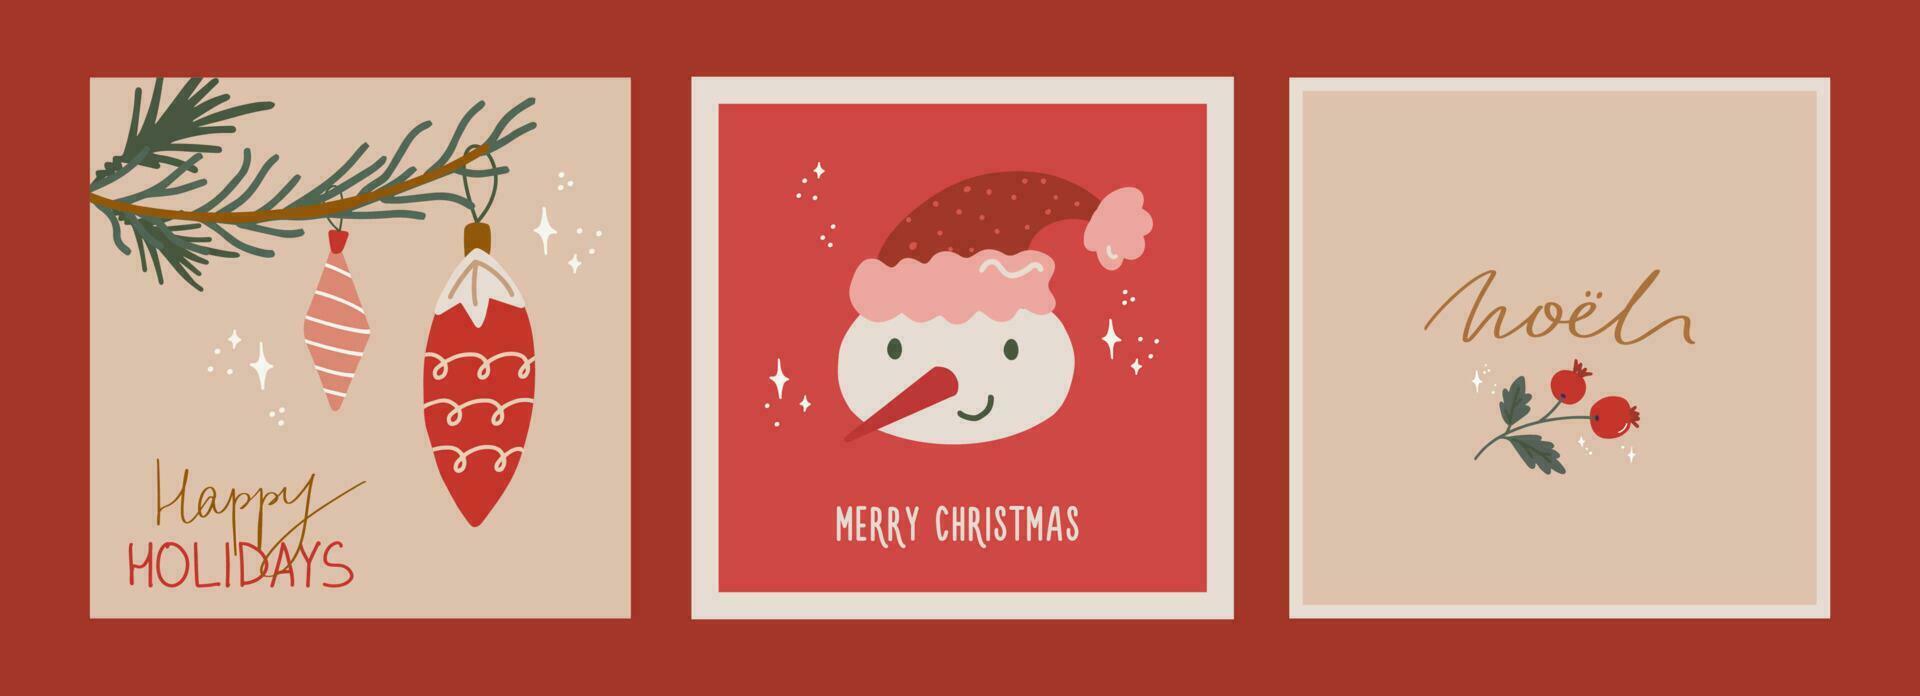 Set of christmas and new year cards with hand drawn illustrations of christmas symbols in retro style vector